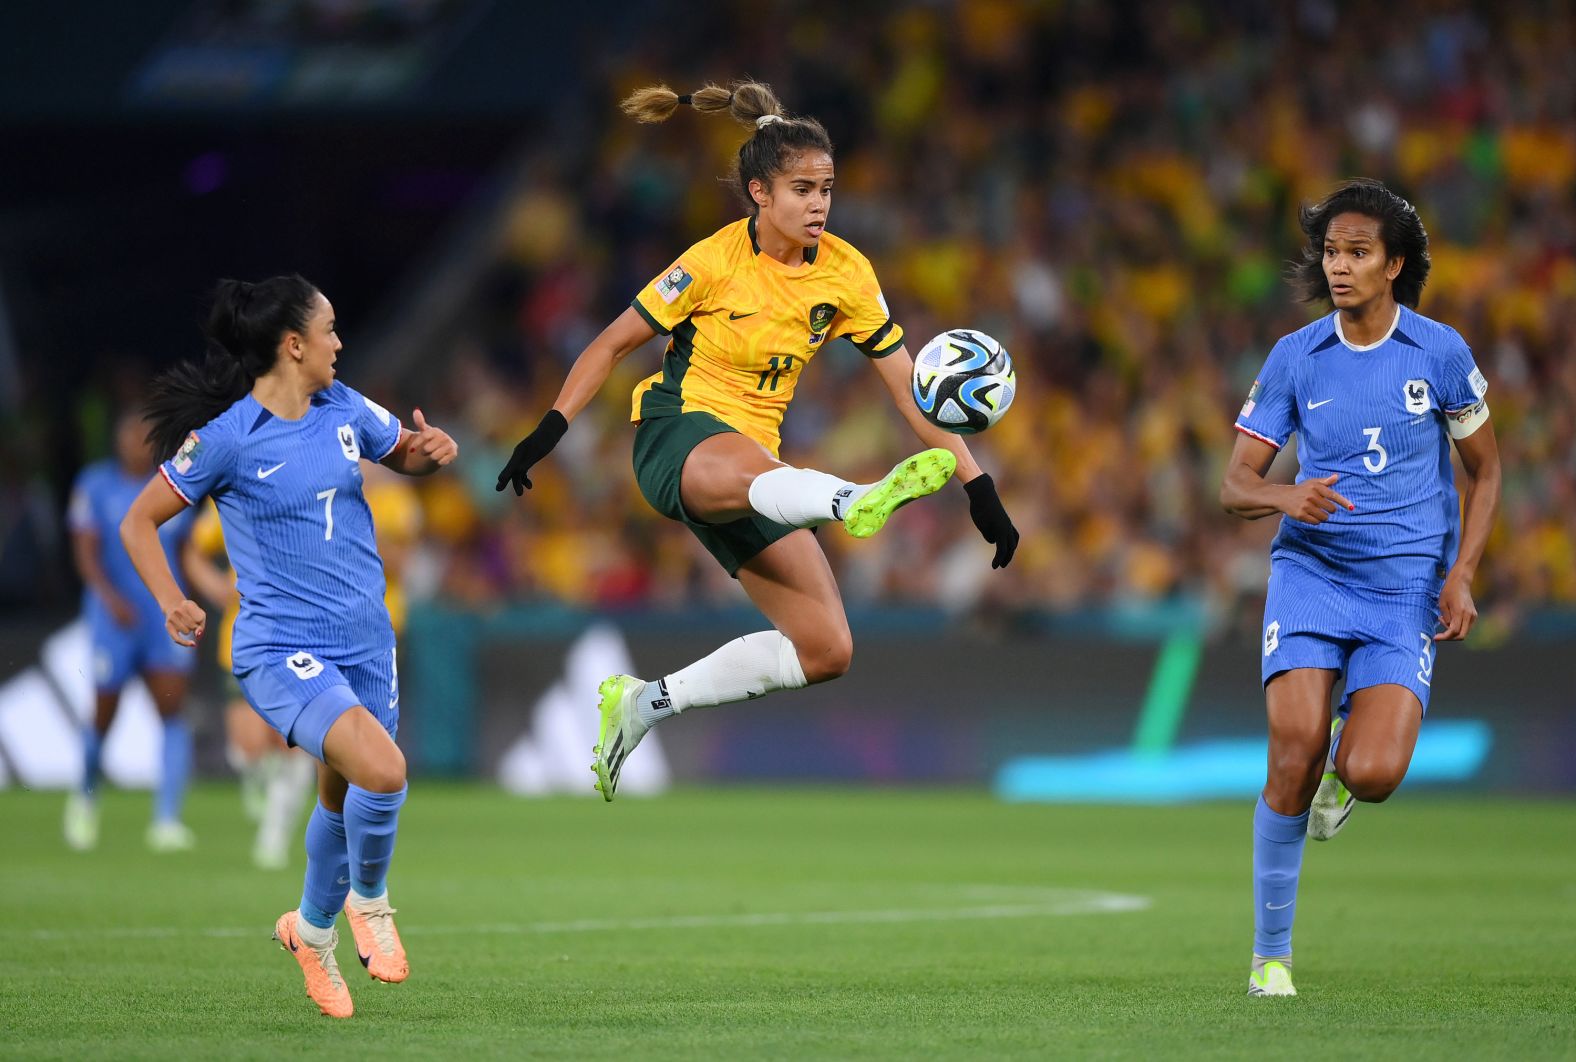 Australia's Mary Fowler controls the ball between France's Sakina Karchaoui and Wendie Renard.